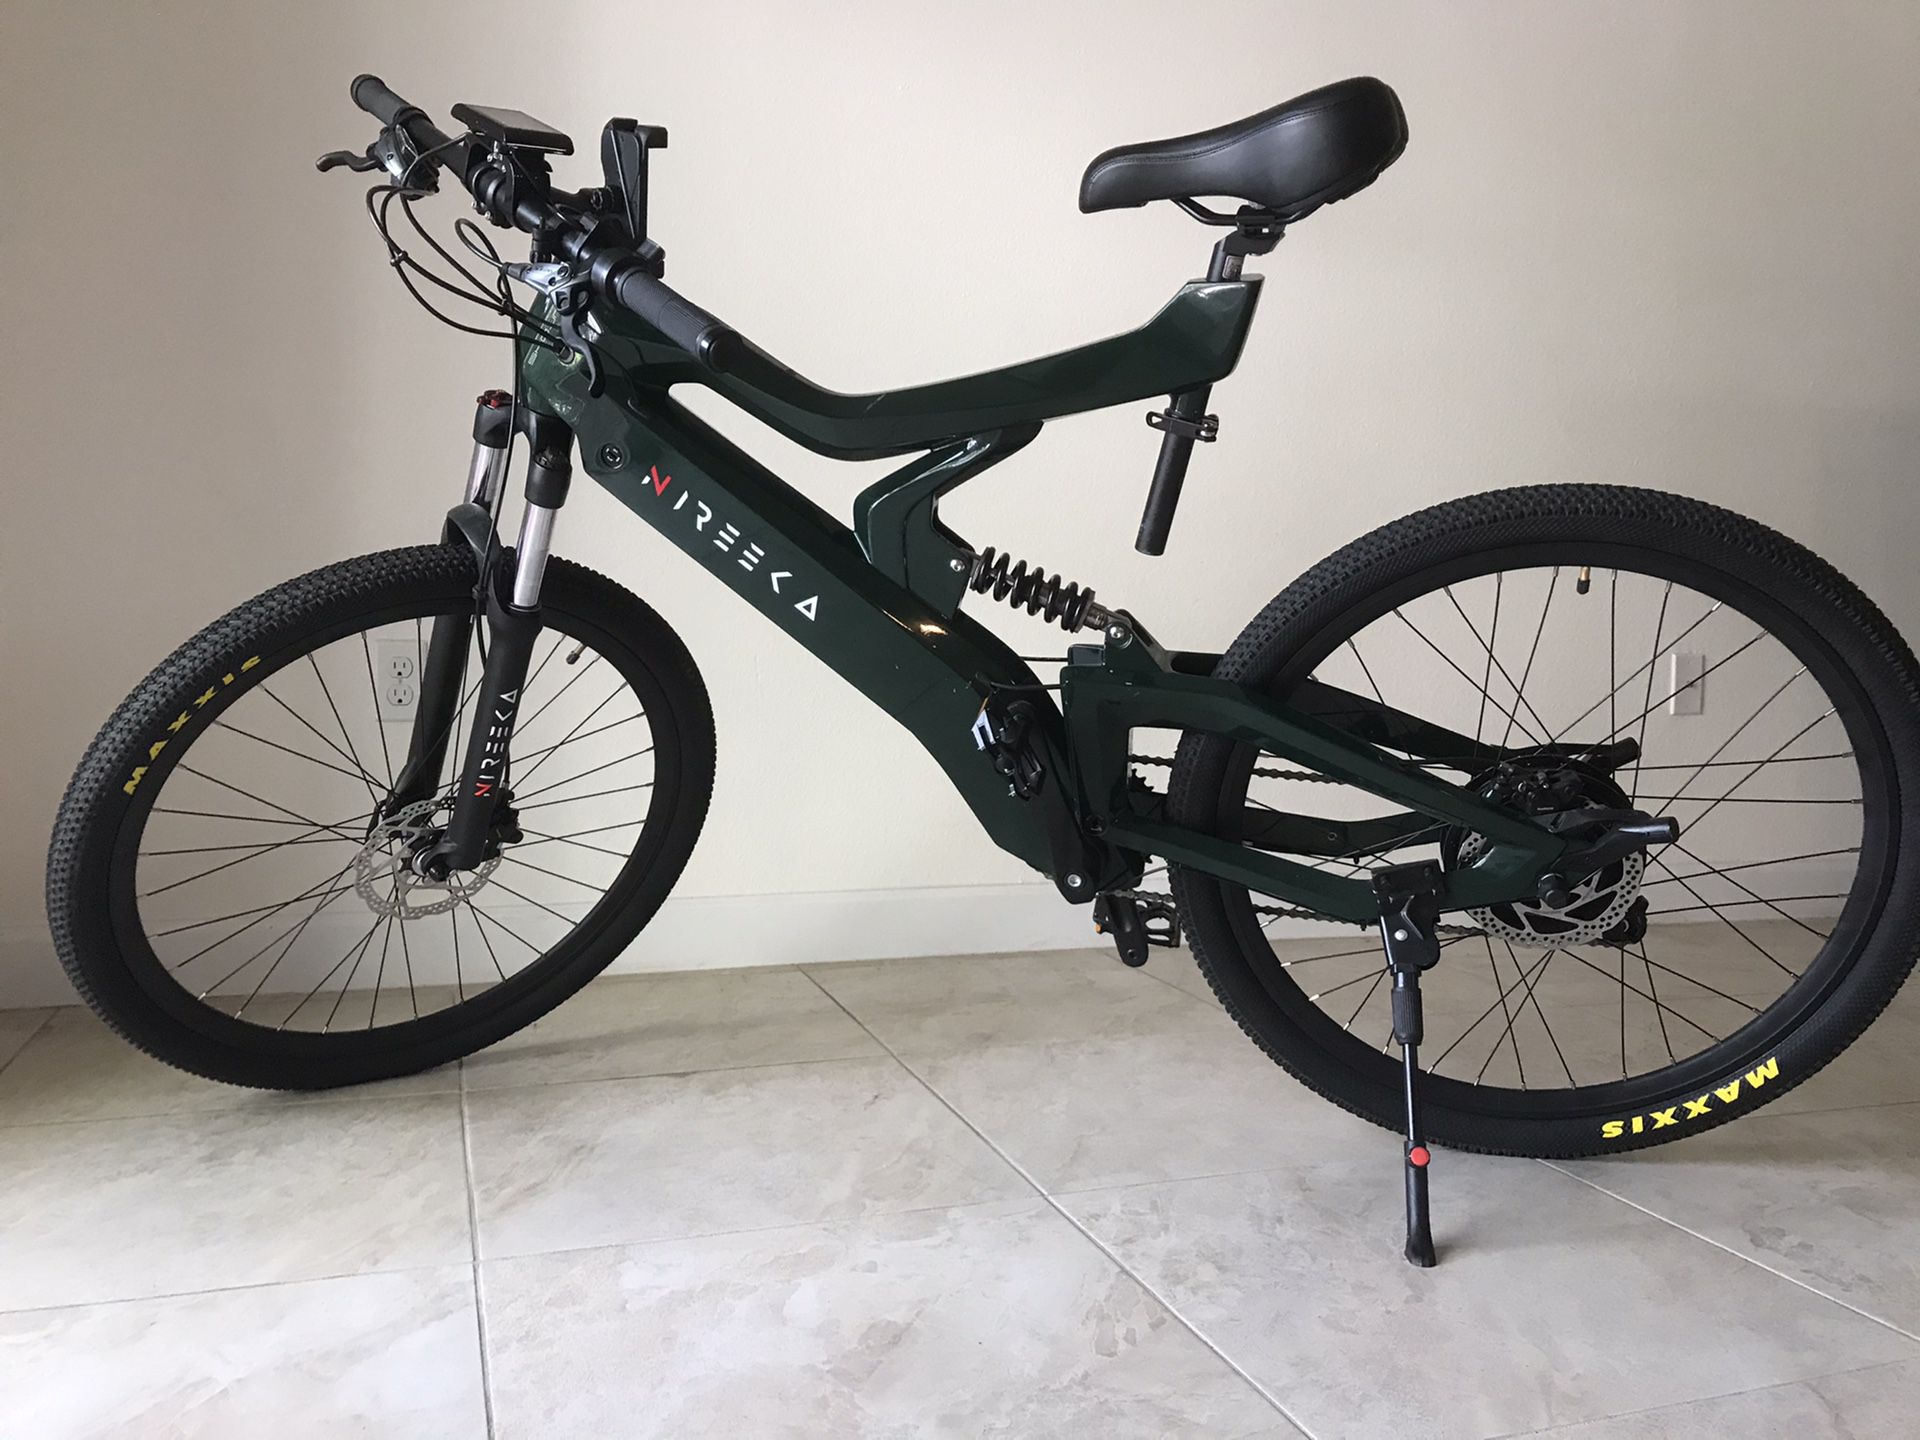 Amazing Electric Bicycle (E-bike) with Unique Carbon Fiber Frame